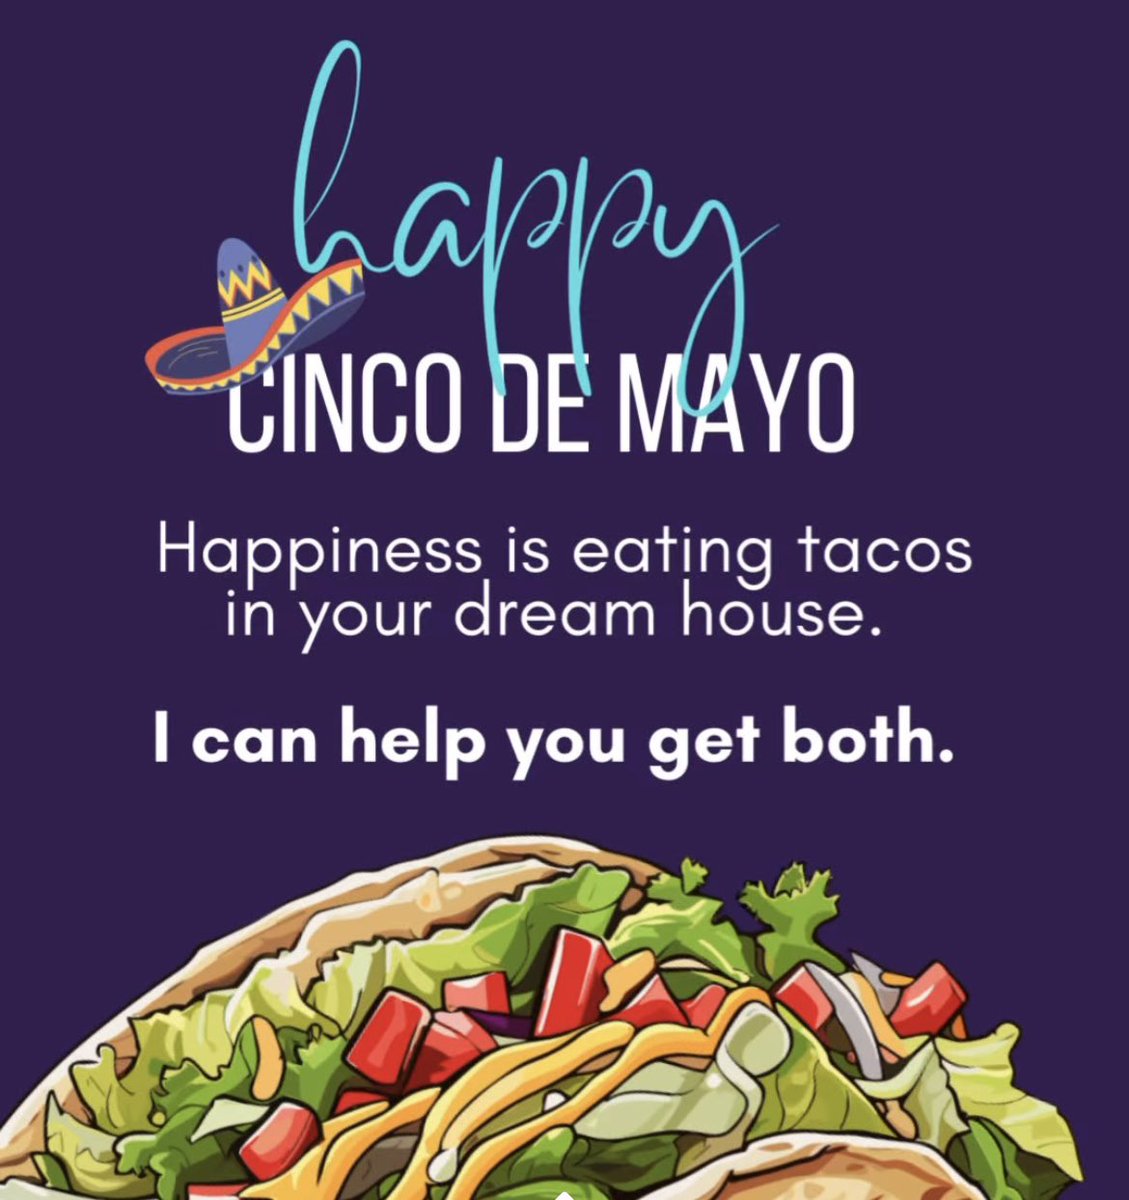 🏡 Looking to buy, sell, or invest in real estate? Call me to discuss your options and let's schedule a meeting. 📱 843-812-8470
#cincodemayo2024 #buyingahome #eattingtacos #realtor #beaufortsc